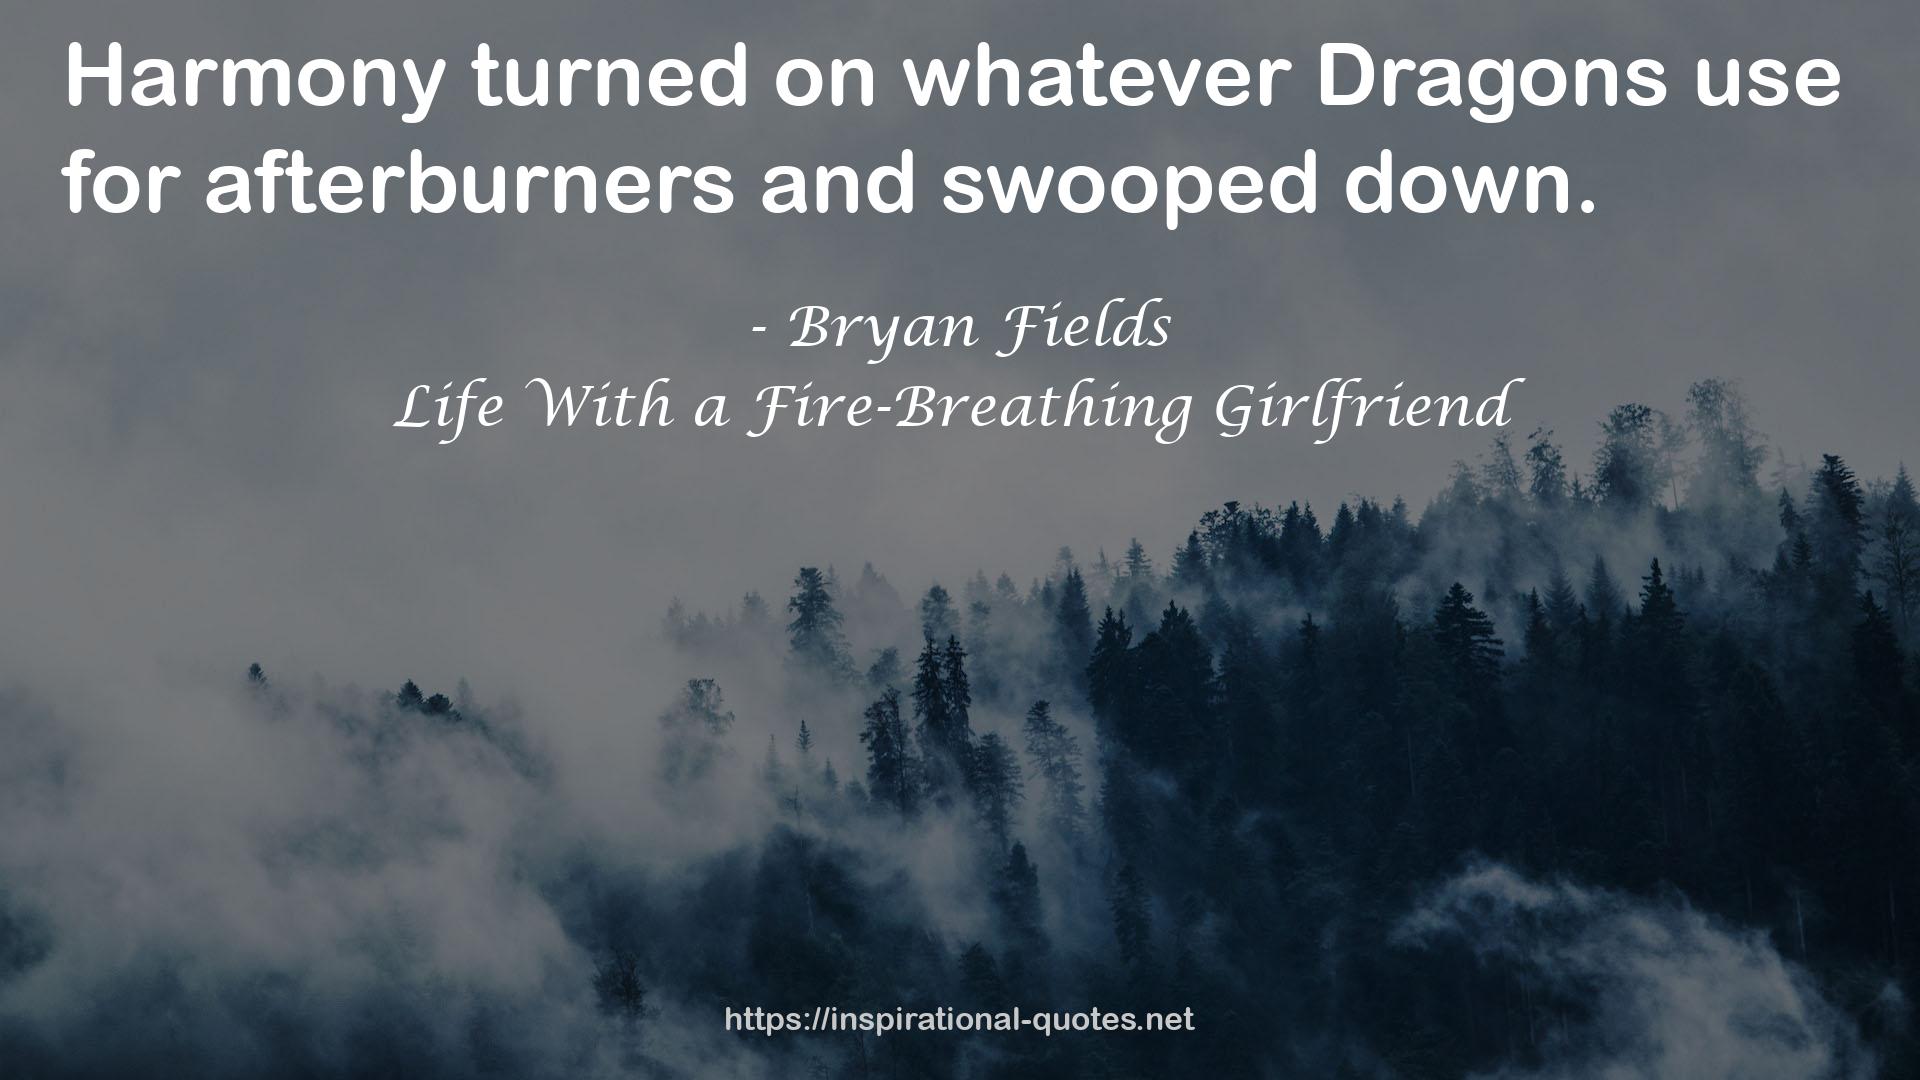 Life With a Fire-Breathing Girlfriend QUOTES